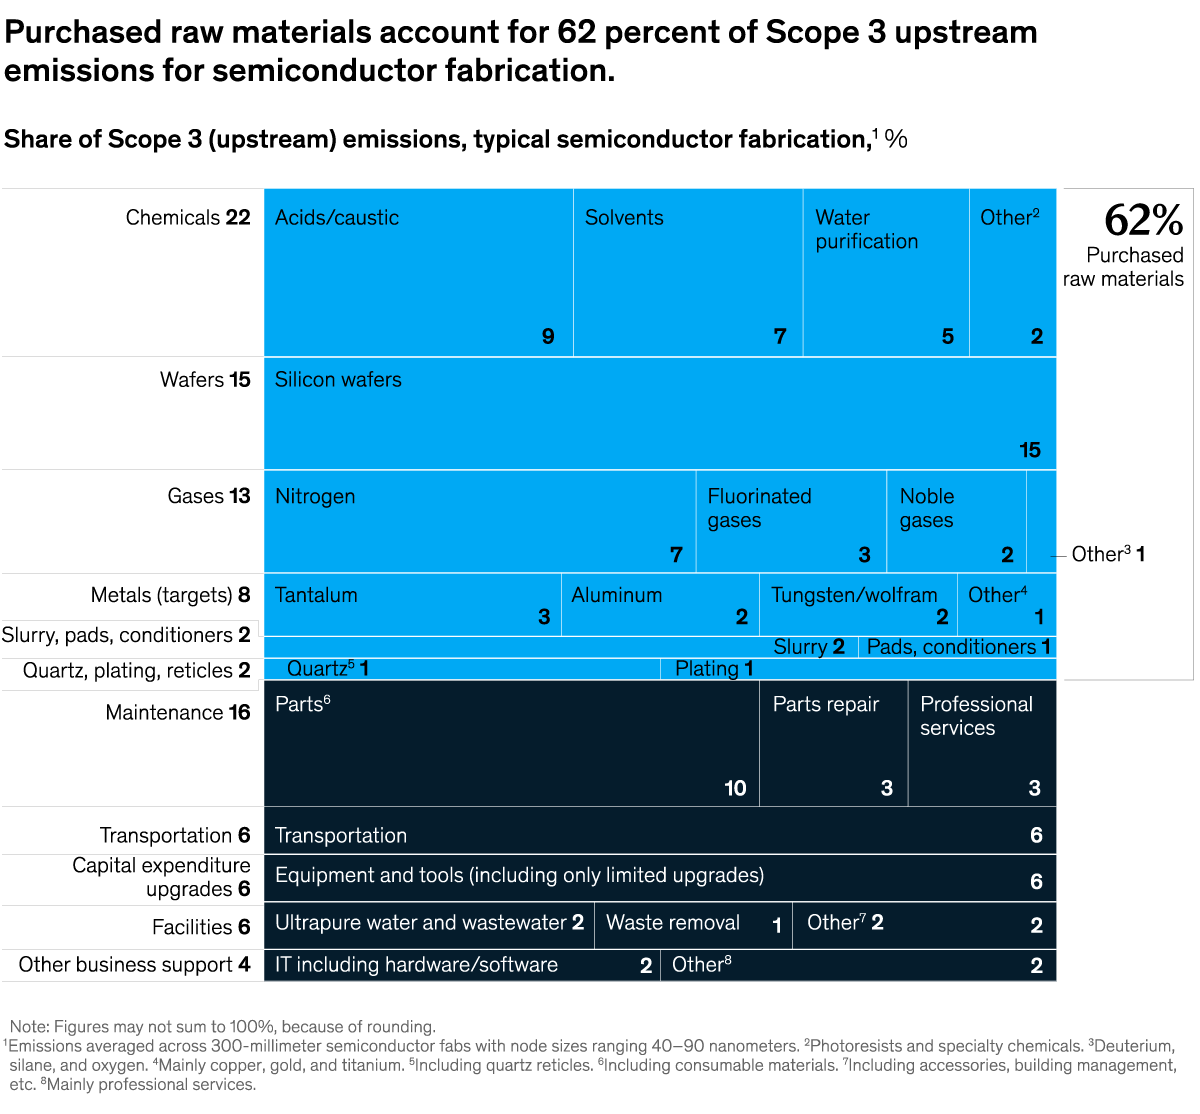 A chart titled “Purchased raw materials account for 62 percent of Scope 3 upstream emissions for semiconductor fabrication.” Click to open the full article on McKinsey.com.